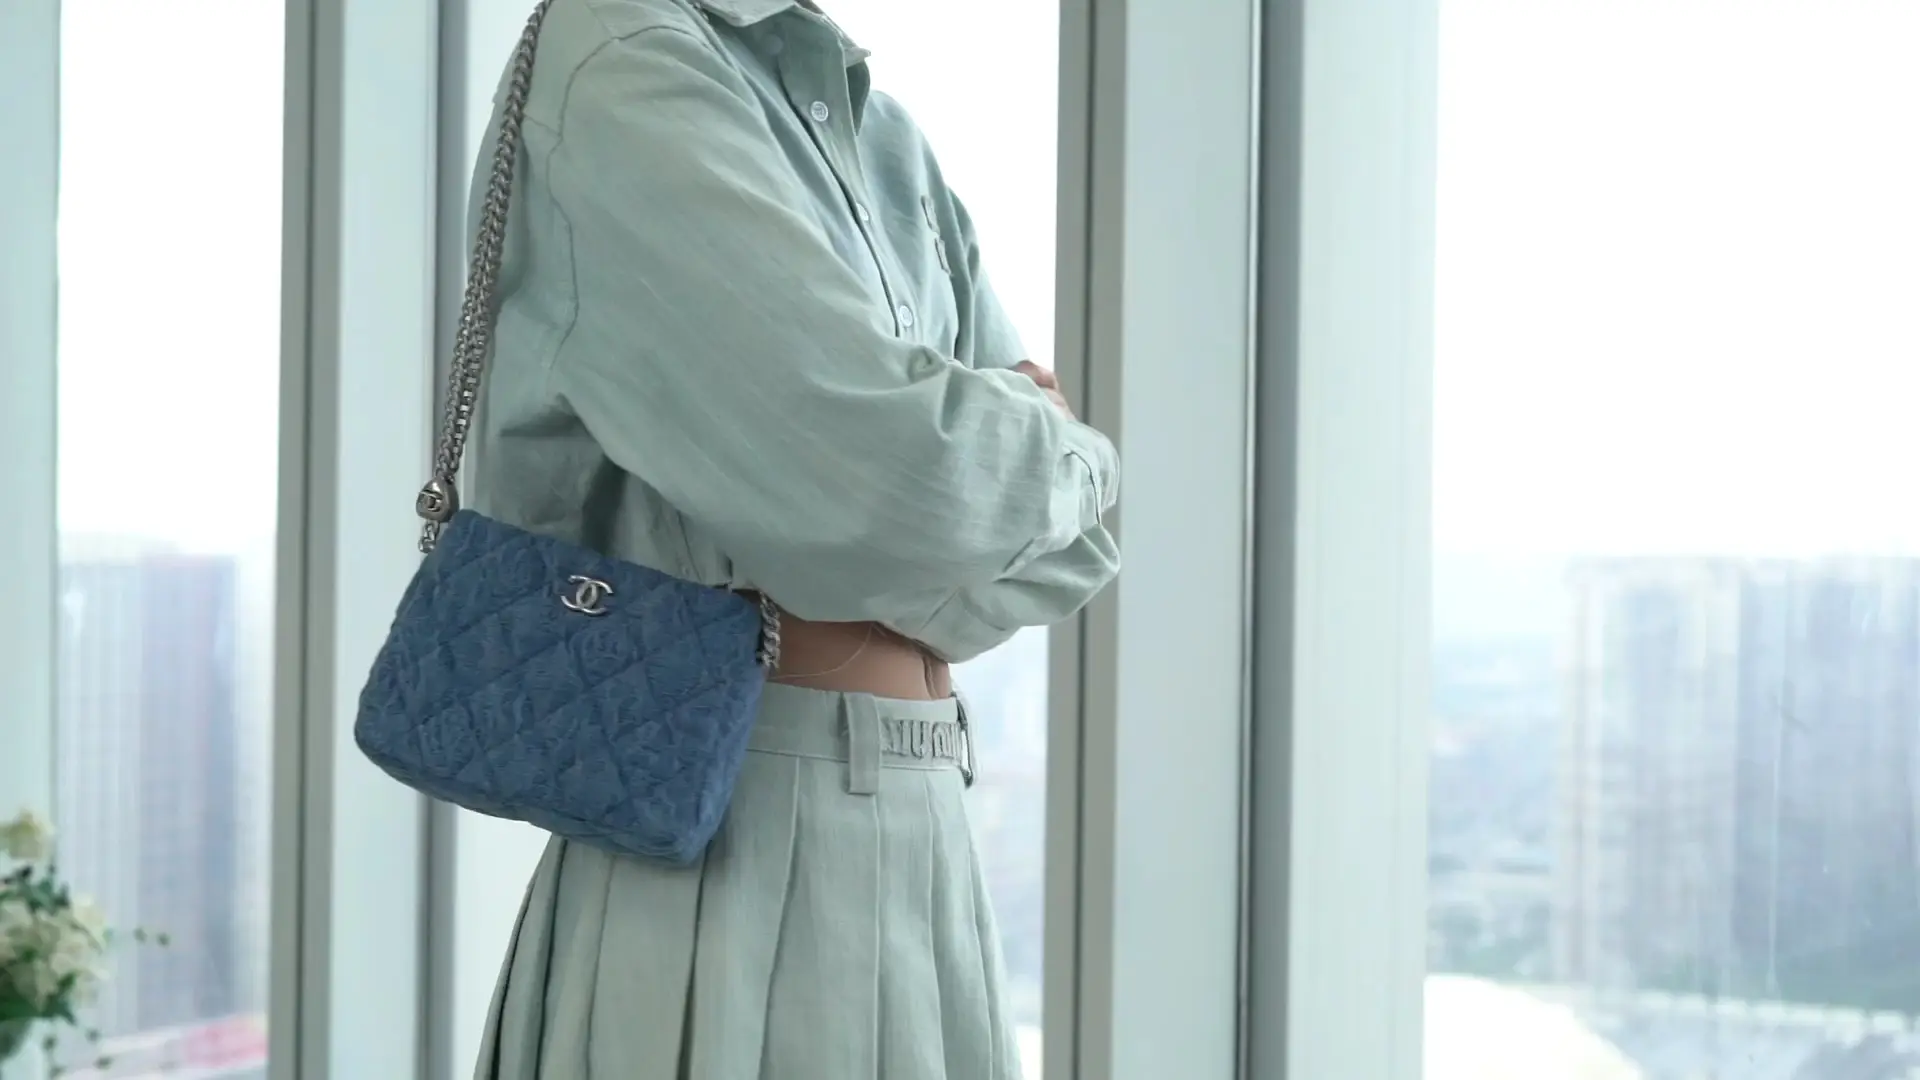 CHANEL -- HoBo bag, Video published by GZ.Amy